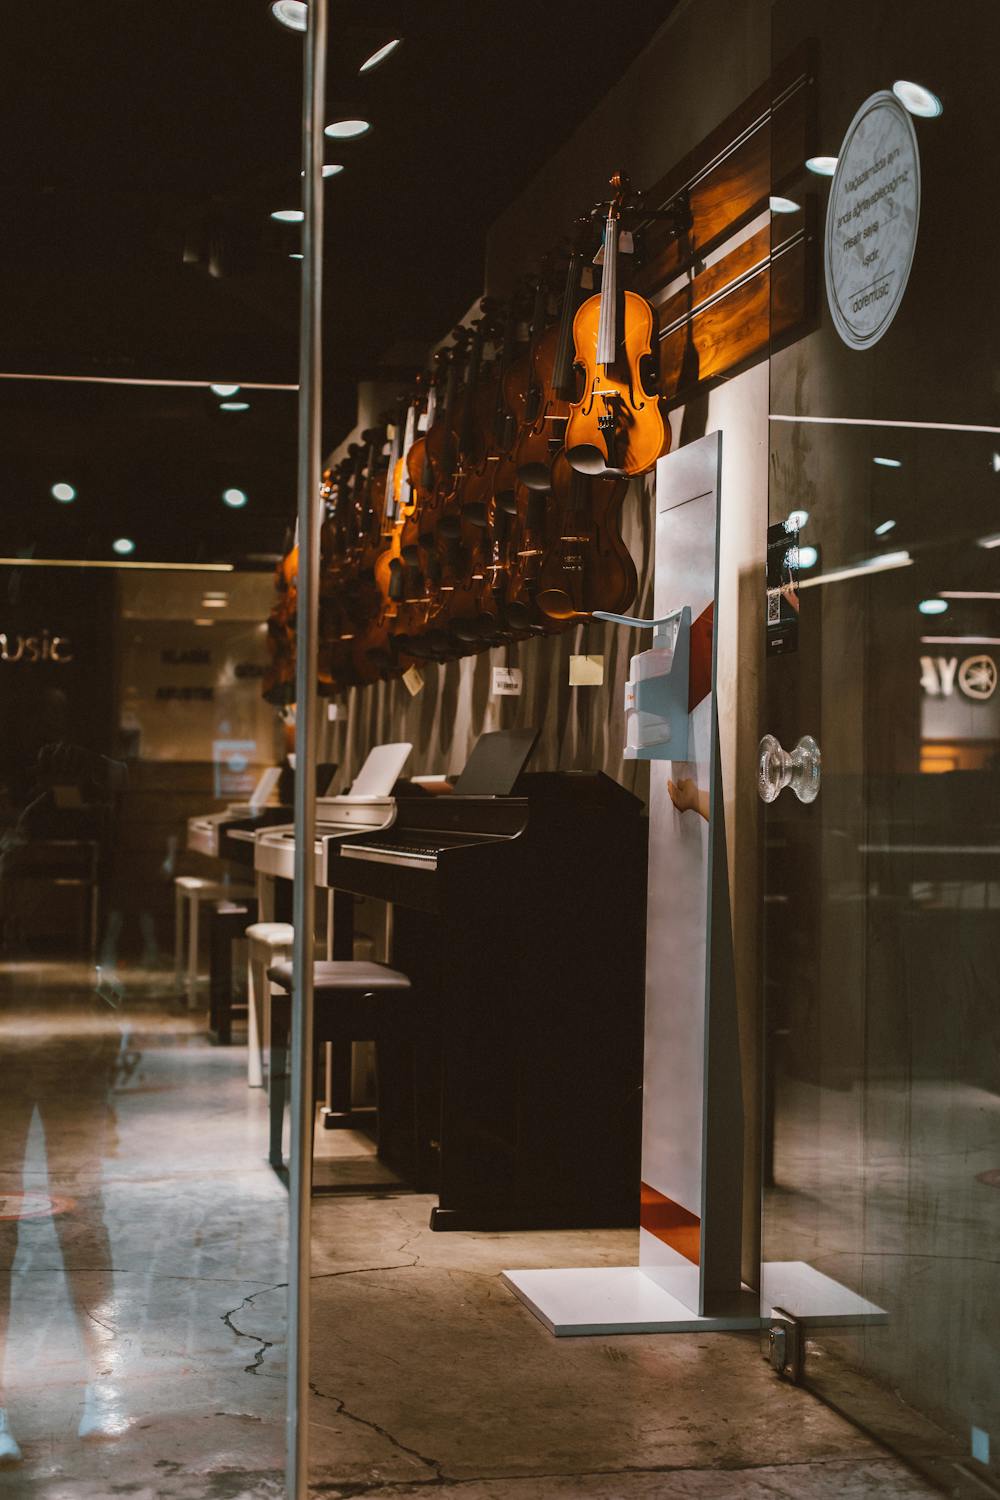 Glass door open to a music store with a row of small upright pianos and violins hanging above.